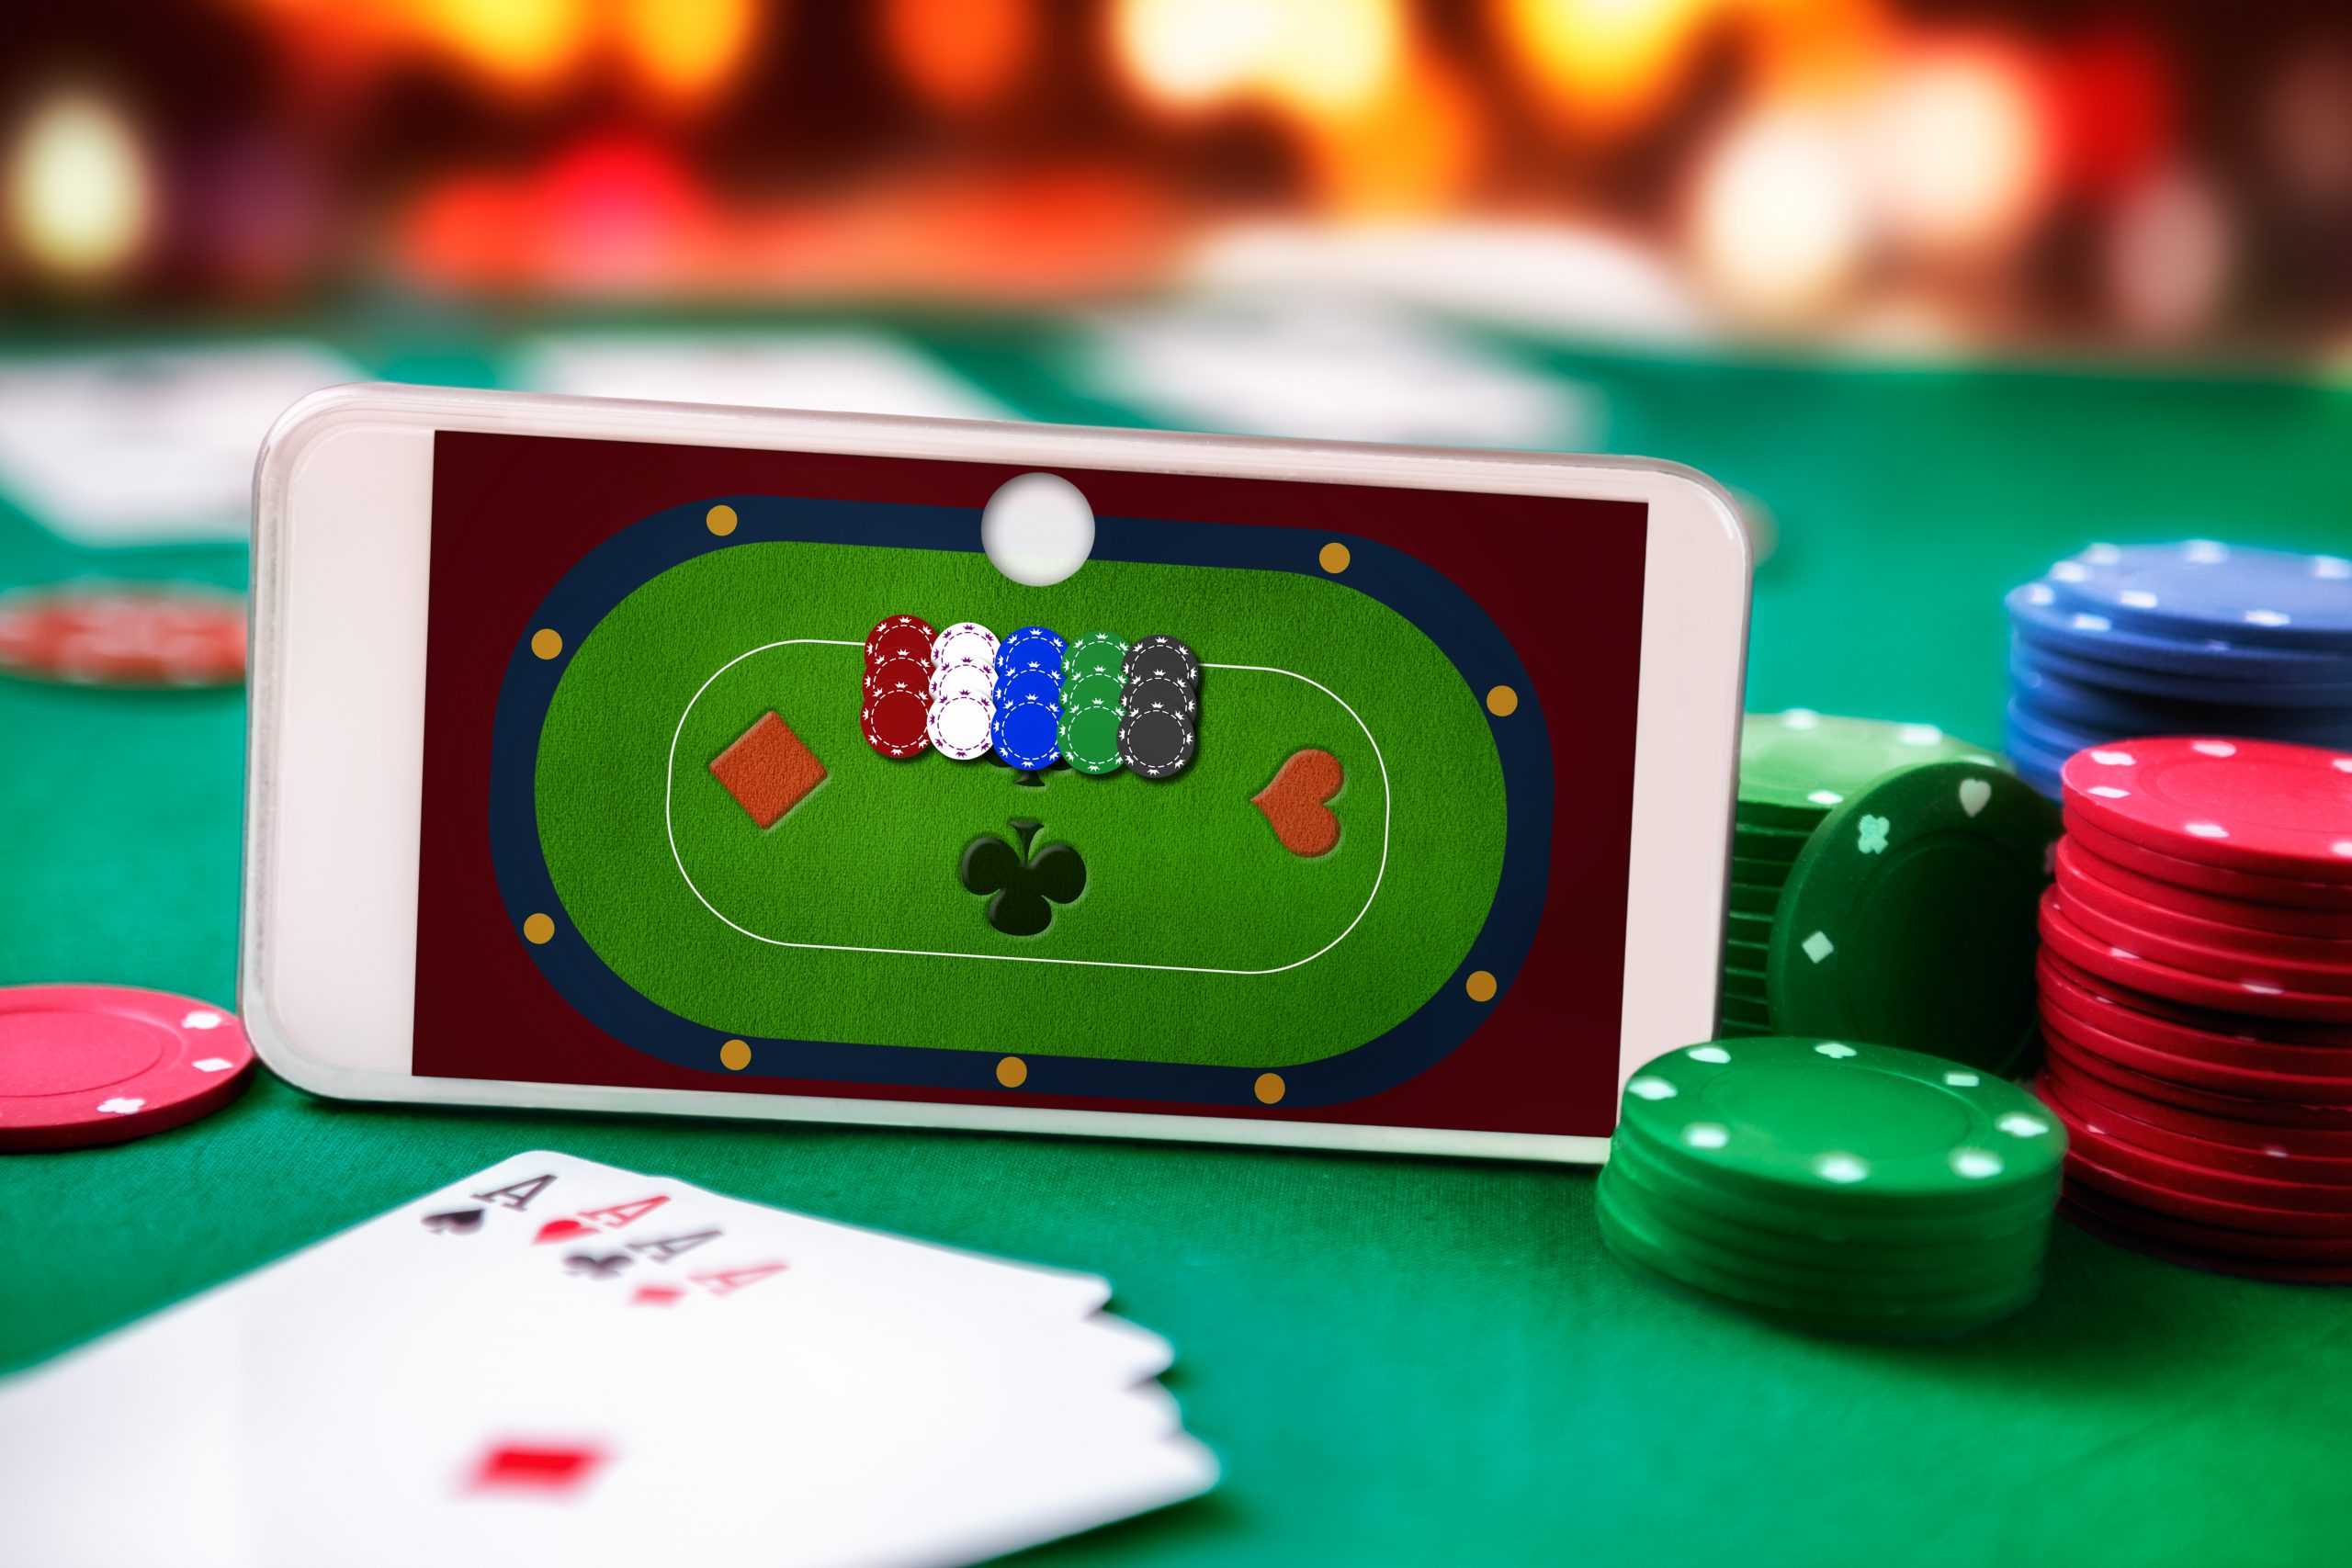 Poker game on phone, poker cards, and poker coins on a green table